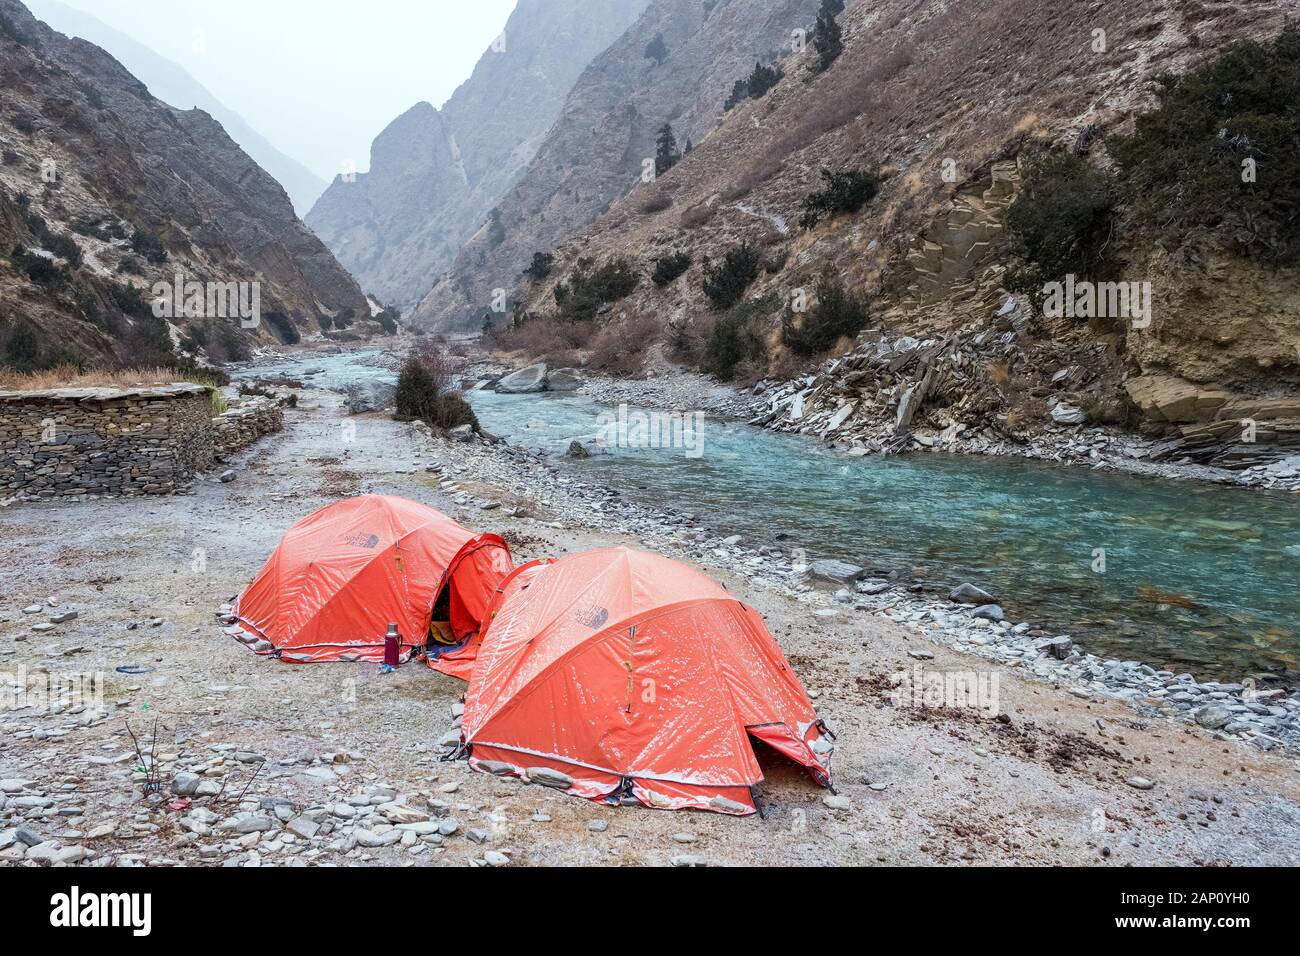 Two tents pitched beside a river in a gorge on the Lower Dolpo Trek in Nepal Stock Photo